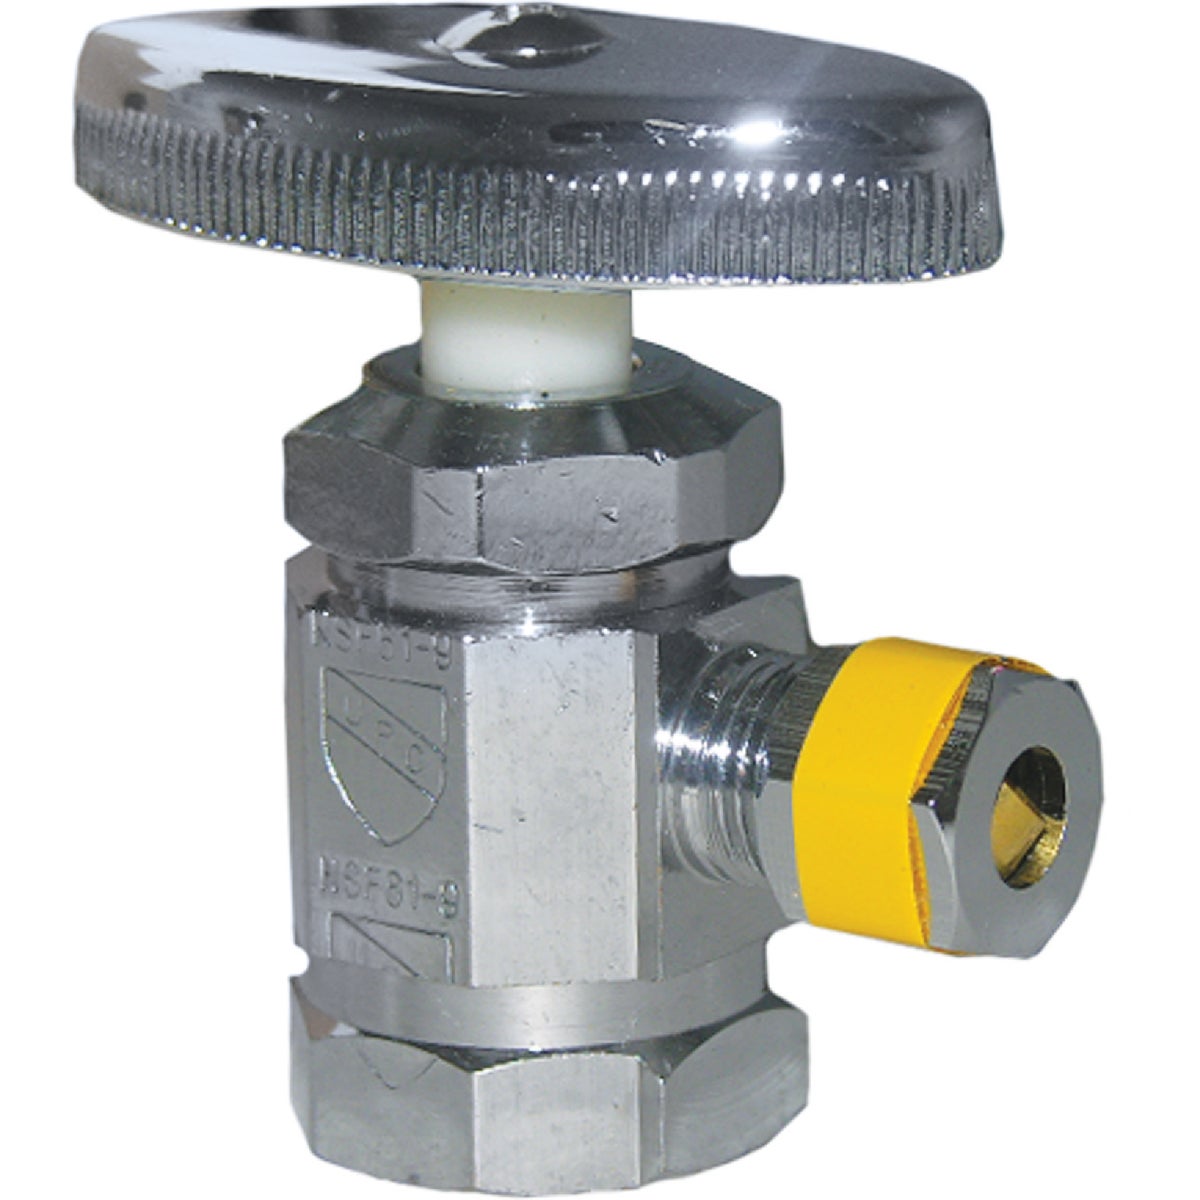 Lasco 1/2 In. FIP Inlet x 1/4 In. Compression Outlet Multi-Turn Style Angle Valve